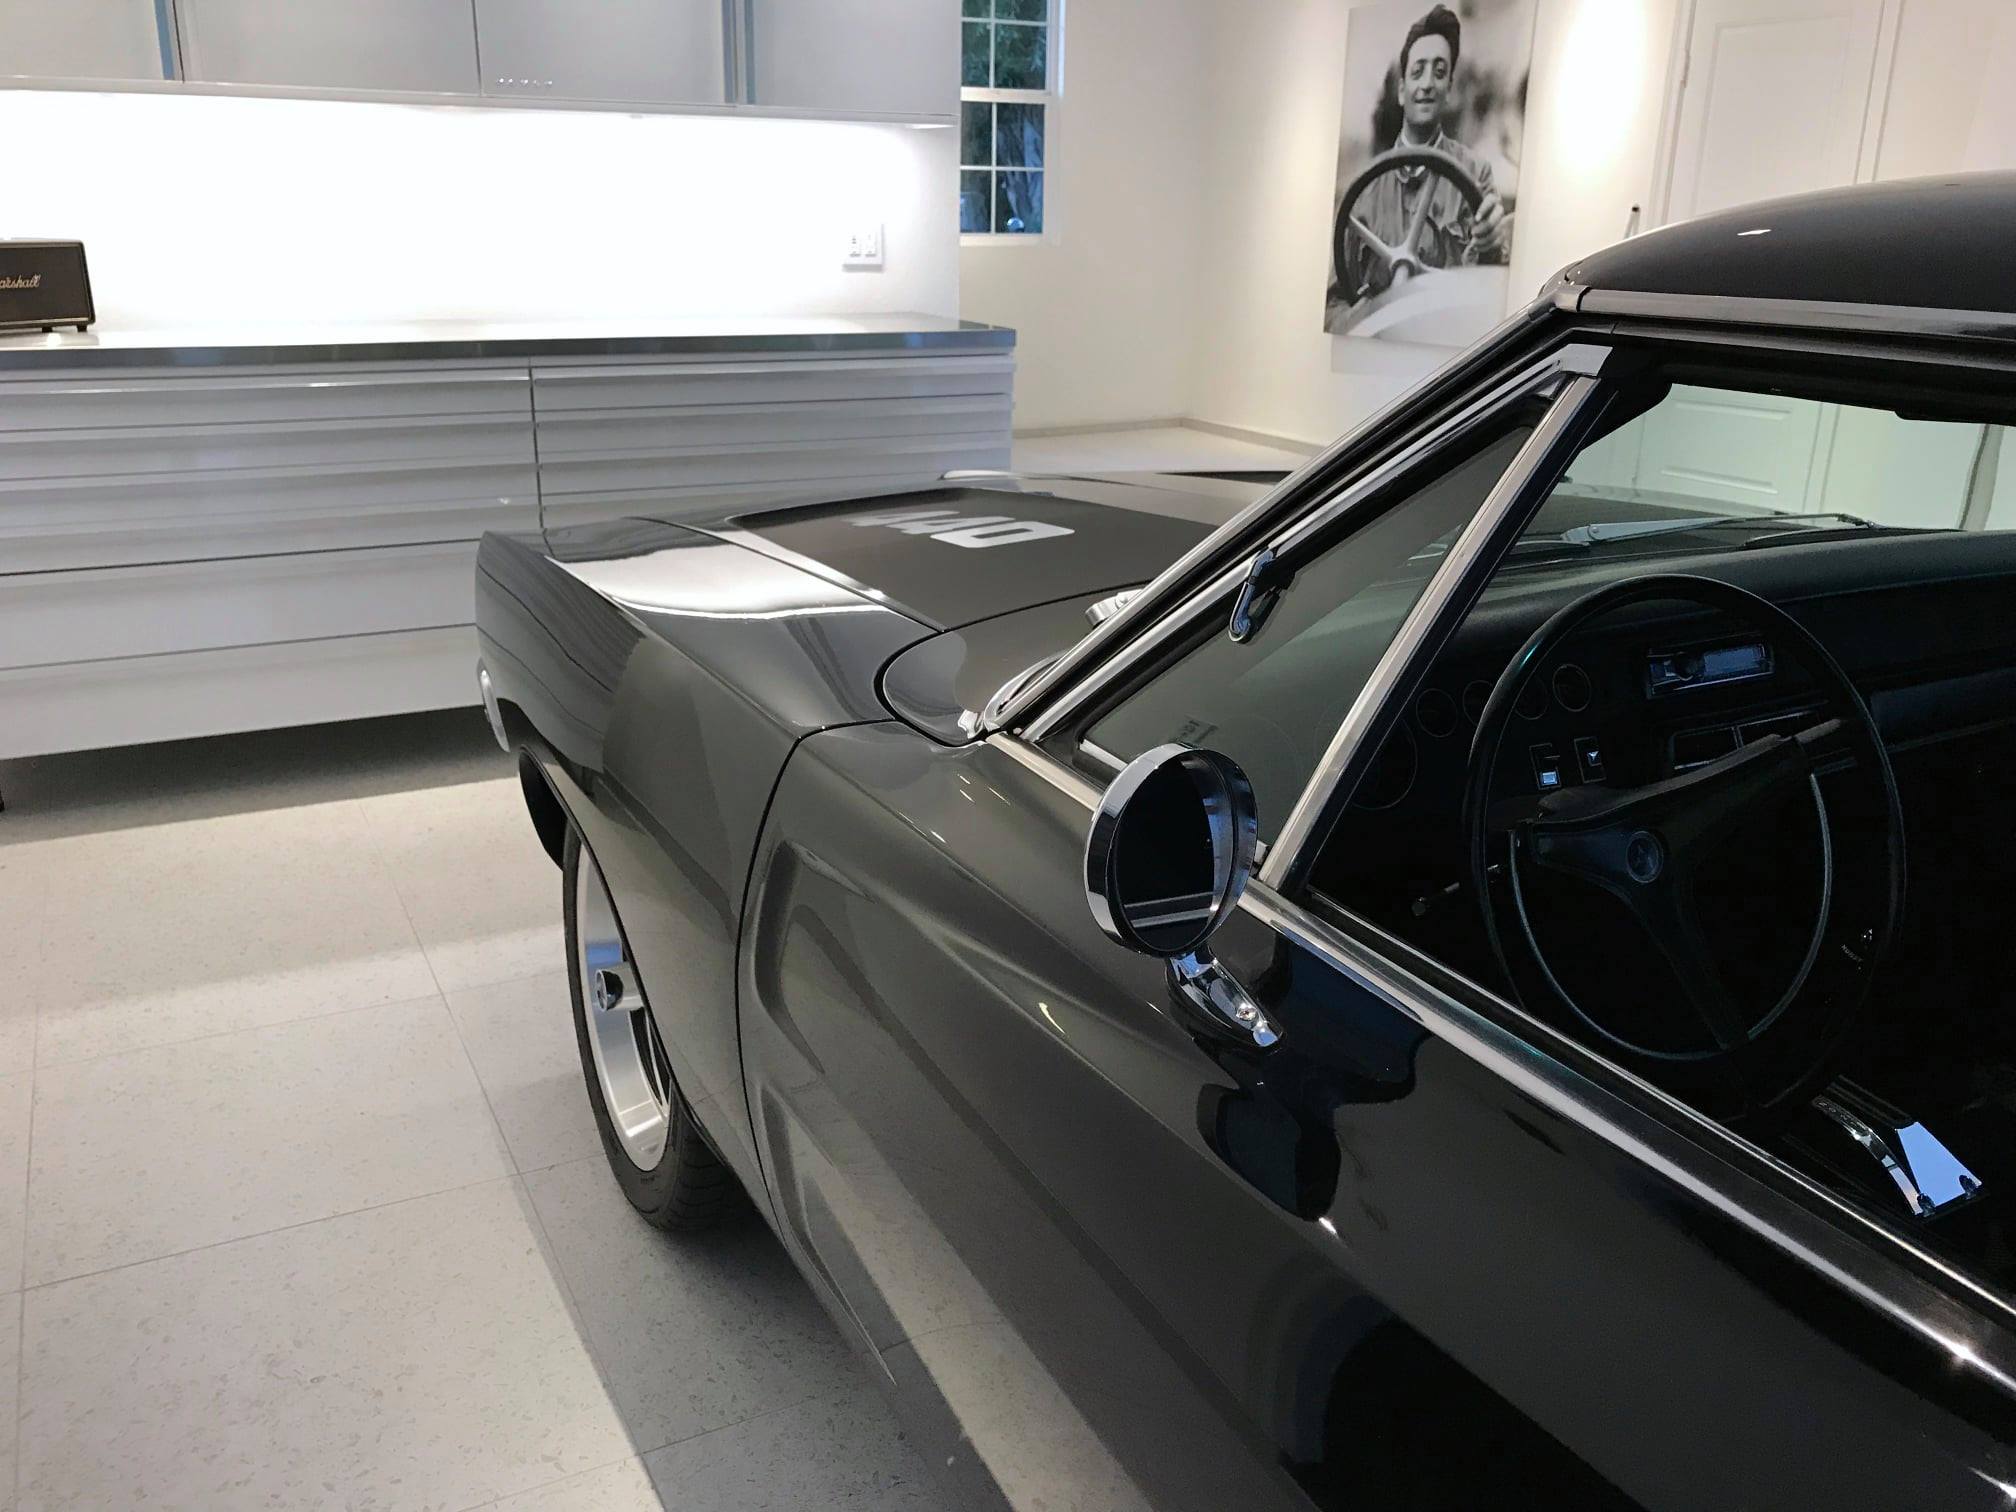 1968 1969 Dodge Charger White Metal Garage Cabinets